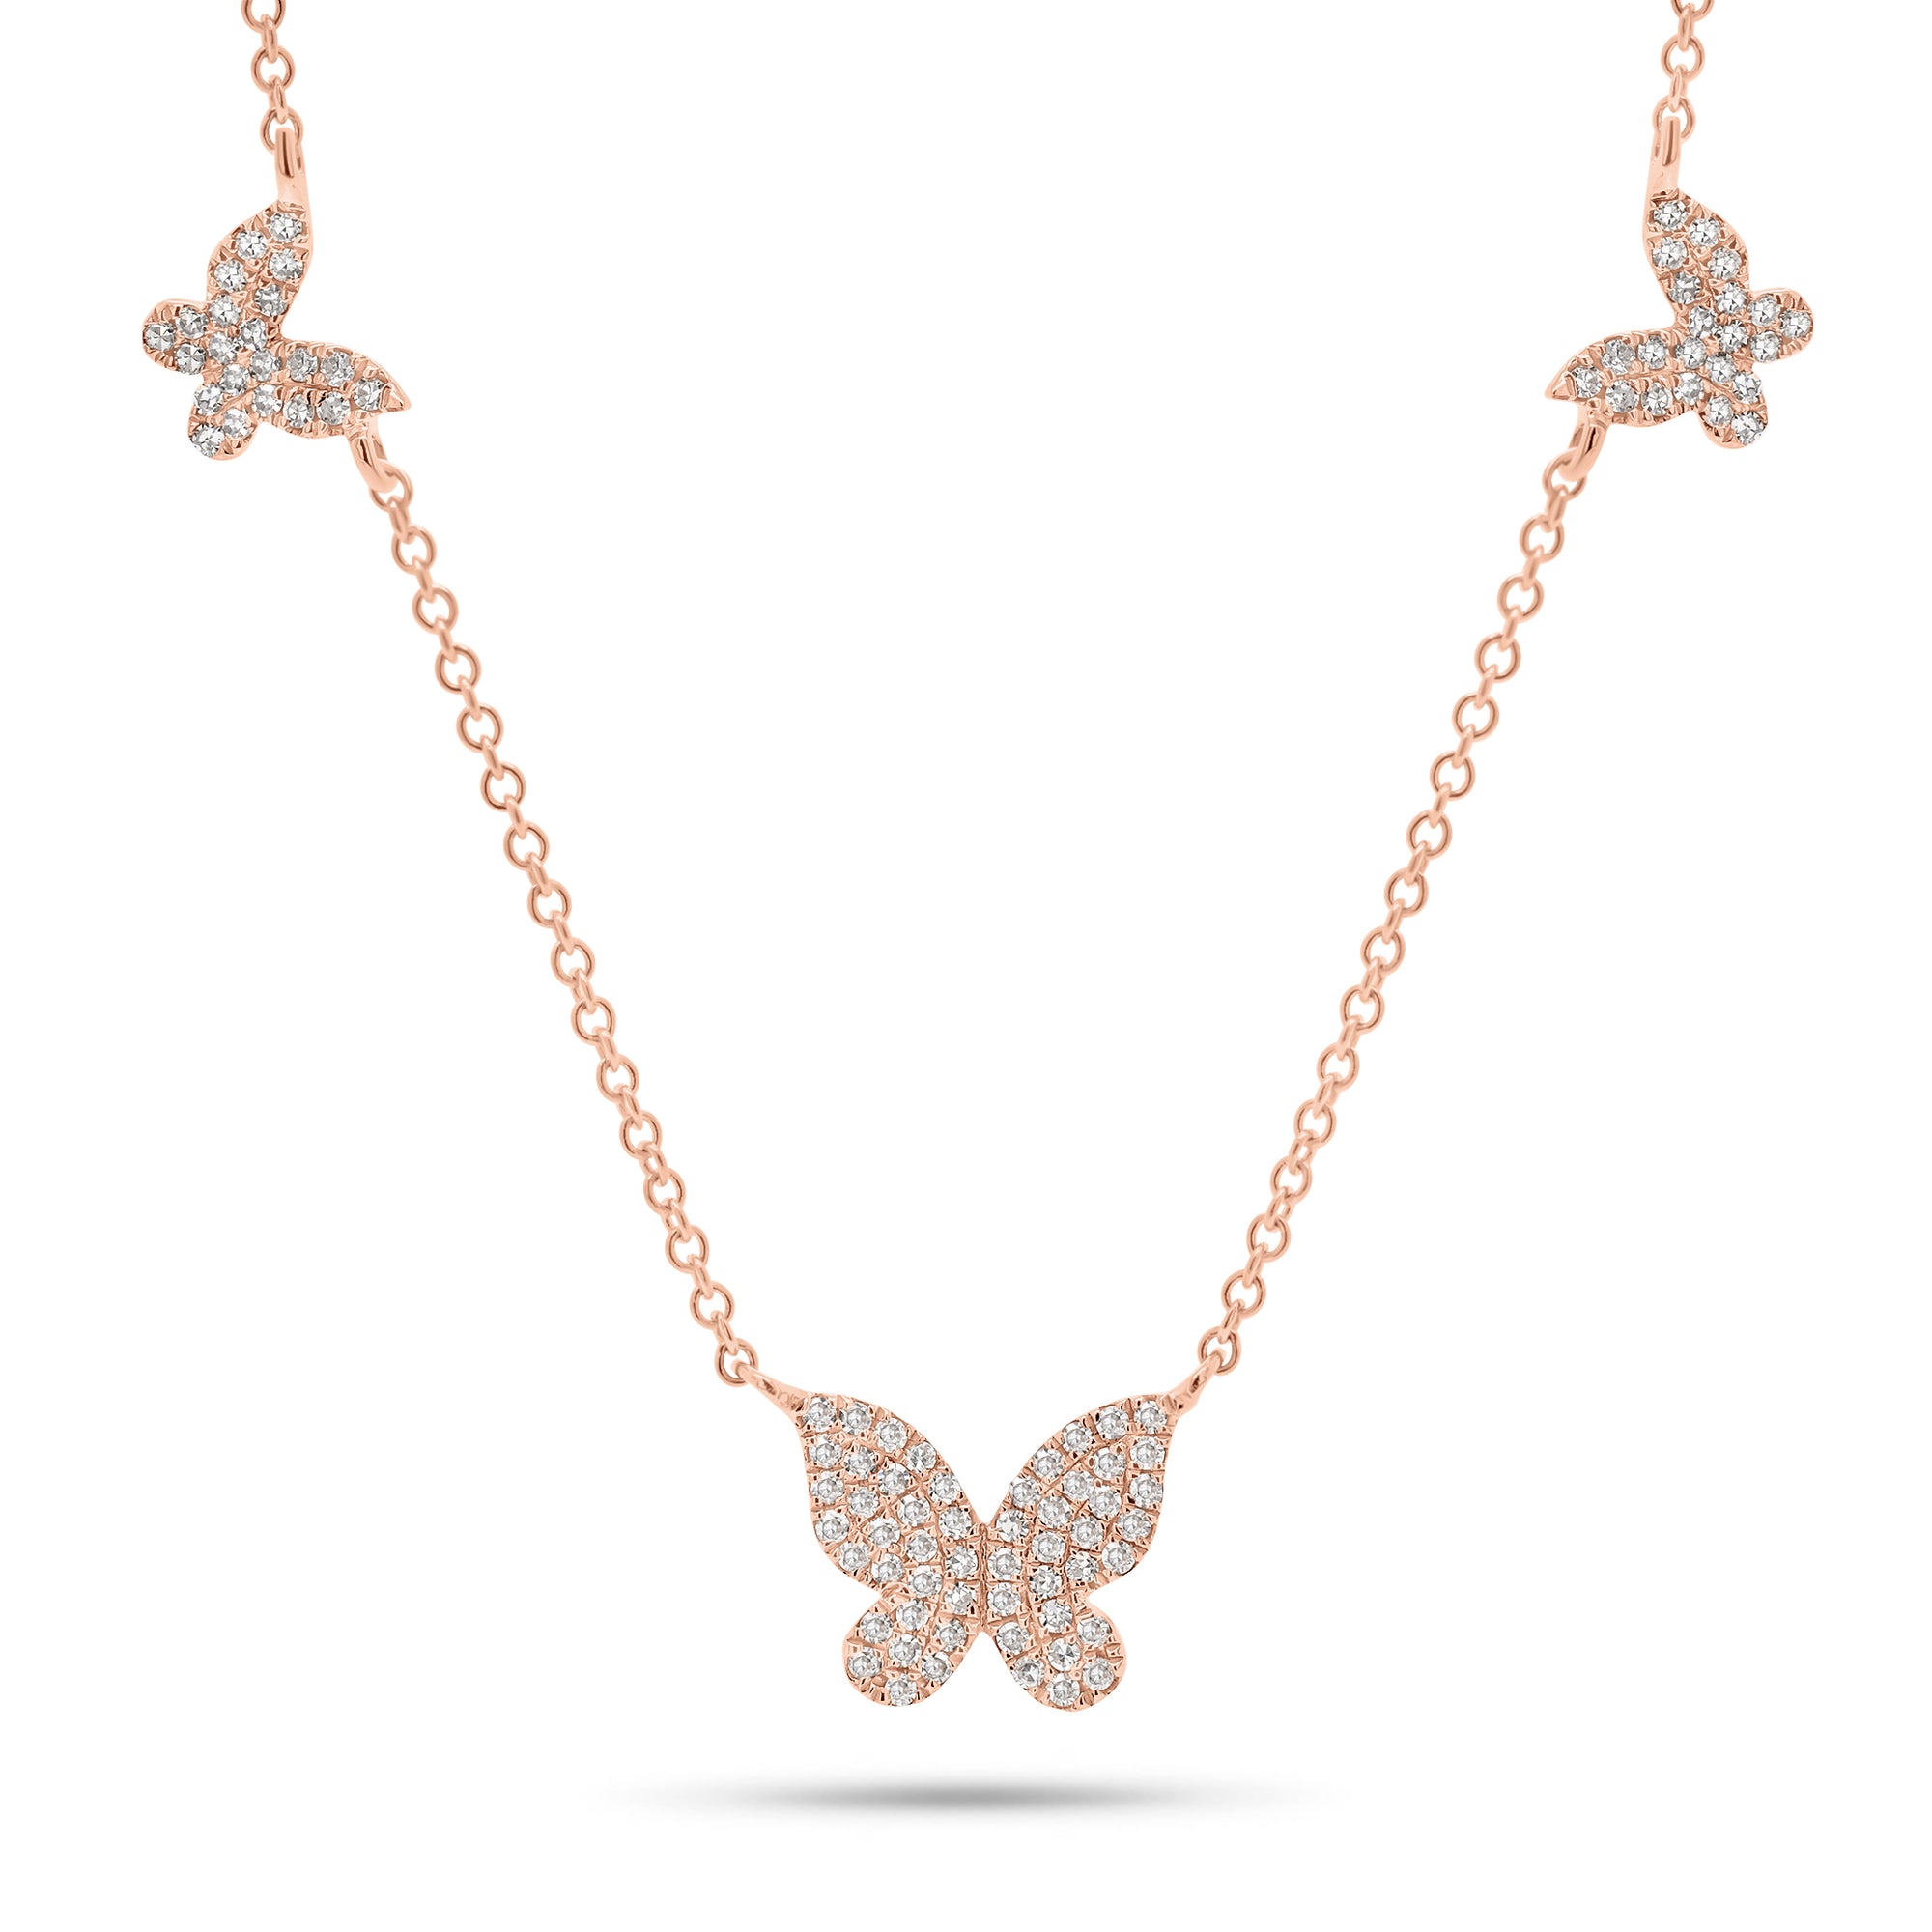 Pave Diamond Butterfly Trio Necklace - 14K gold weighing 2.0 grams  - 98 round diamonds weighing 0.23 carats